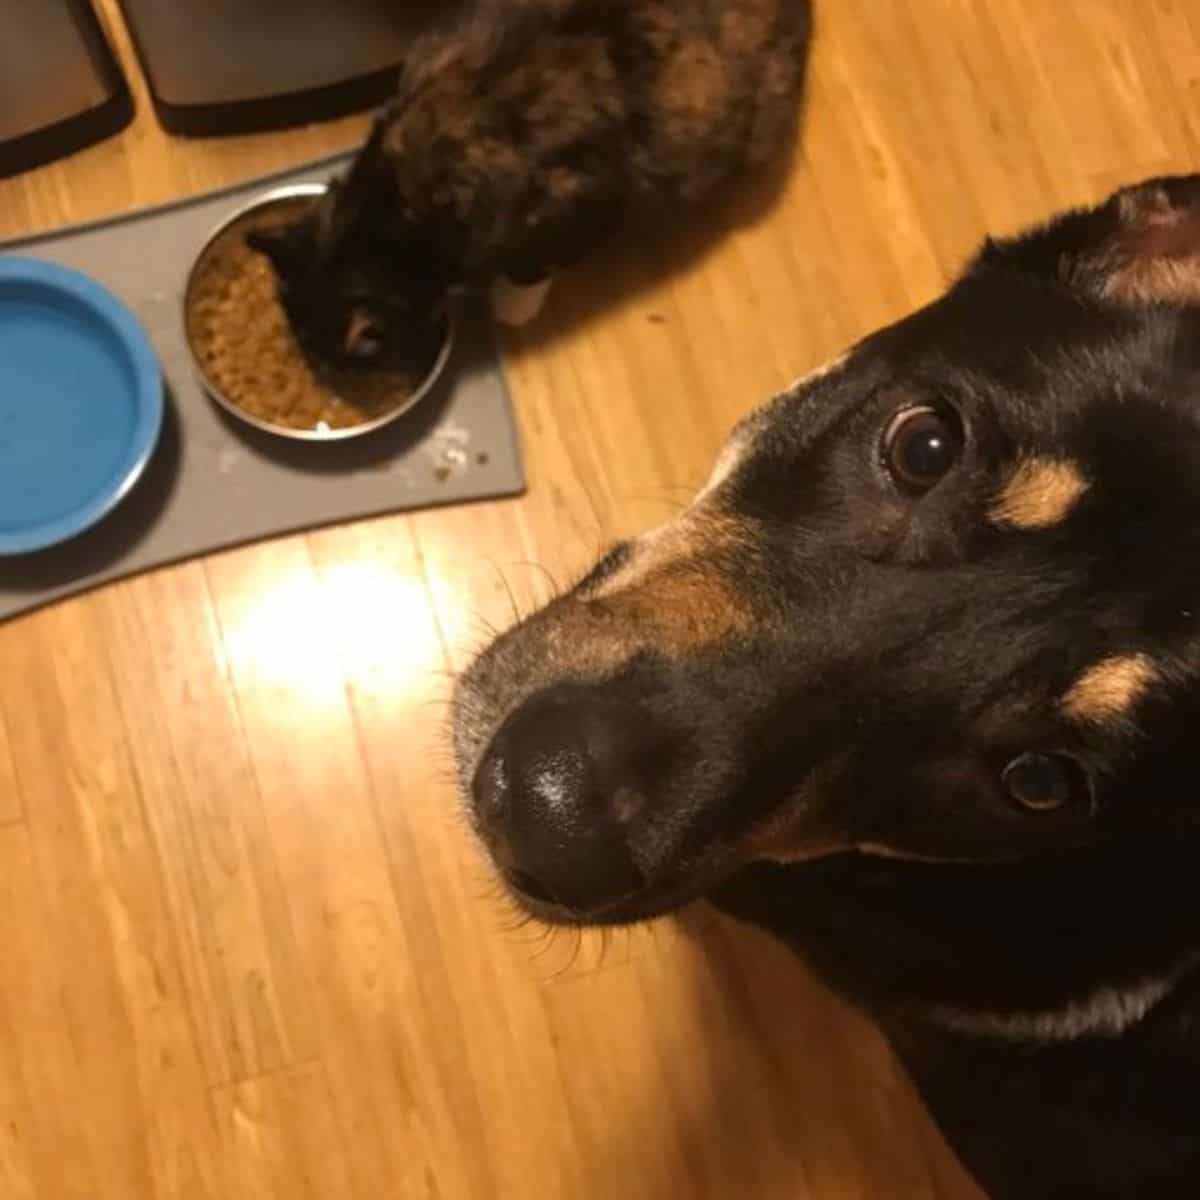 cat eating from dog's food bowl